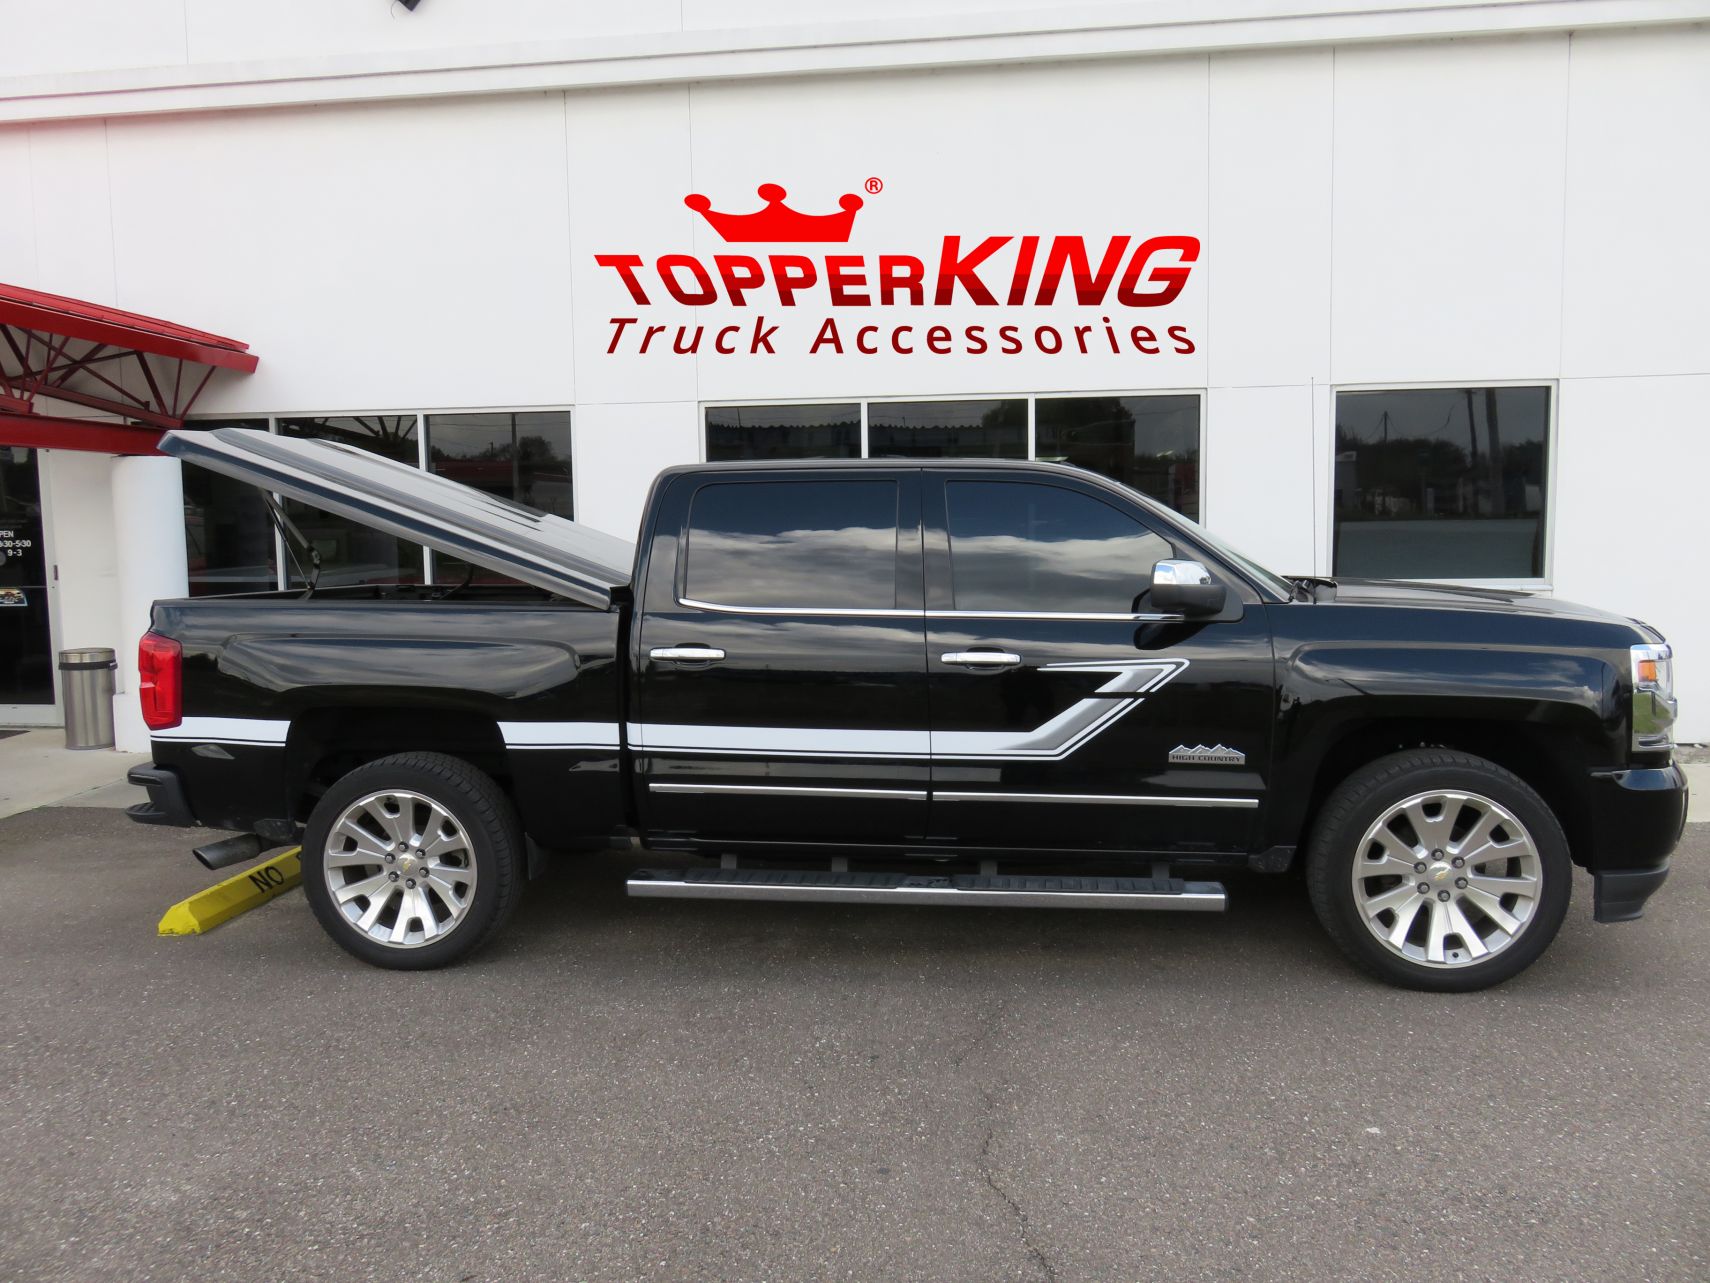 2017 Chevy Silverado with LEER 700, Side Steps, Bedliner, Graphics, Hitch. Call TopperKING Brandon 813-689-2449 or Clearwater 727-530-9066.